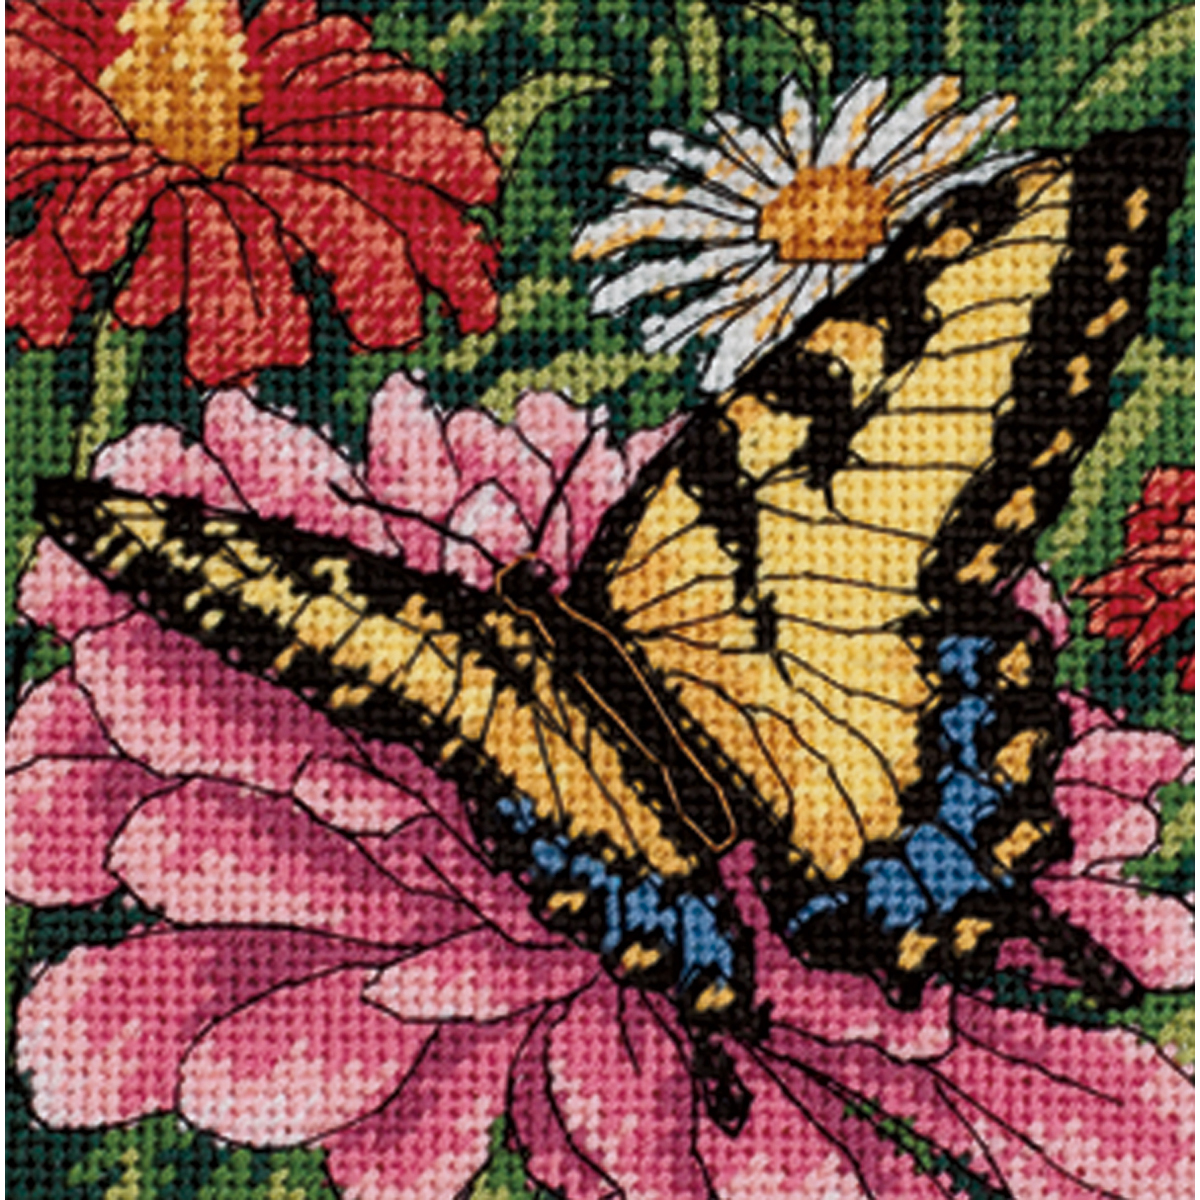 Butterfly On Zinnia Mini Needlepoint Kit-5"X5" Stitched In Floss - Picture 1 of 1